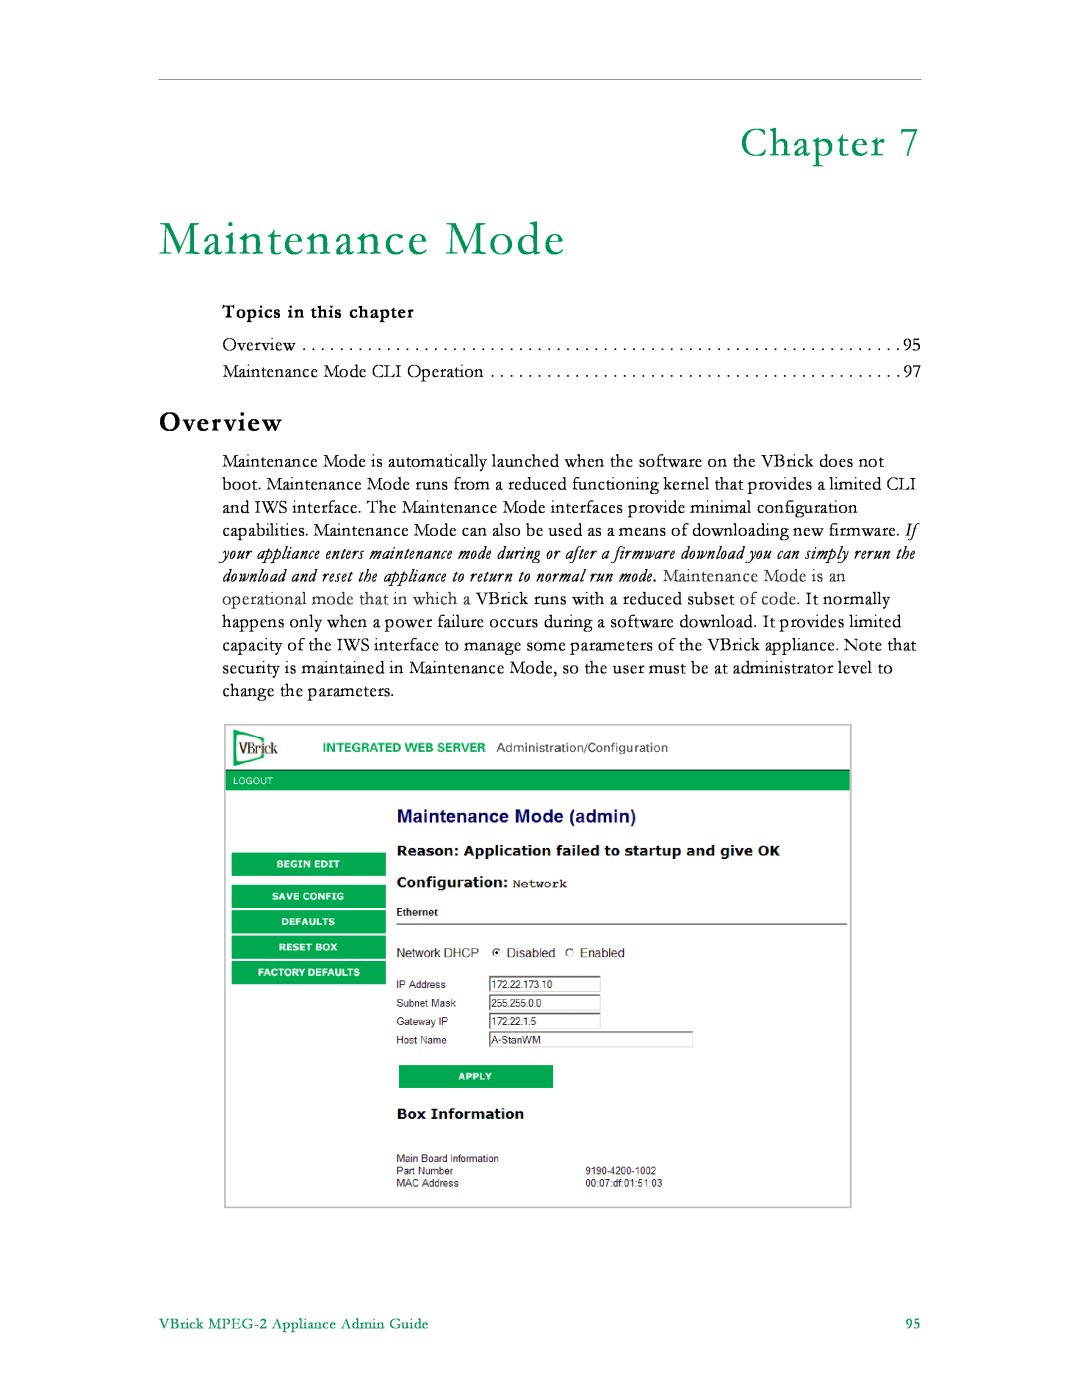 VBrick Systems VB4000, VB6000, VB5000 manual Maintenance Mode, Chapter, Overview, Topics in this chapter 